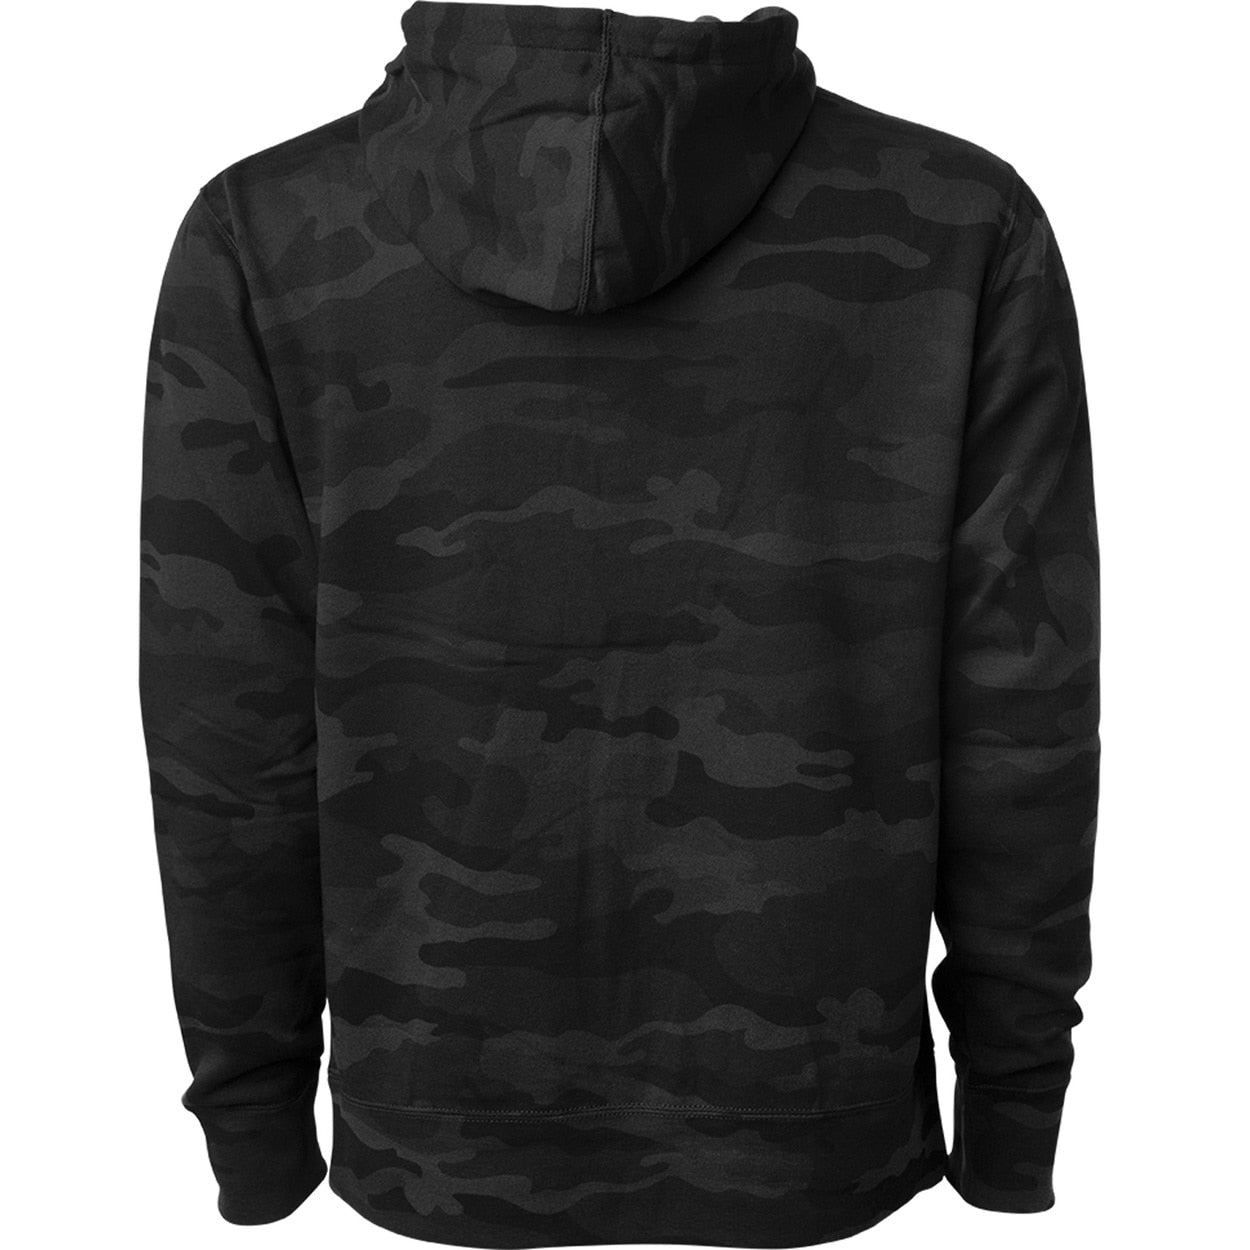 Exodus Optical Embroidered Pullover Hoodie - Black Camo